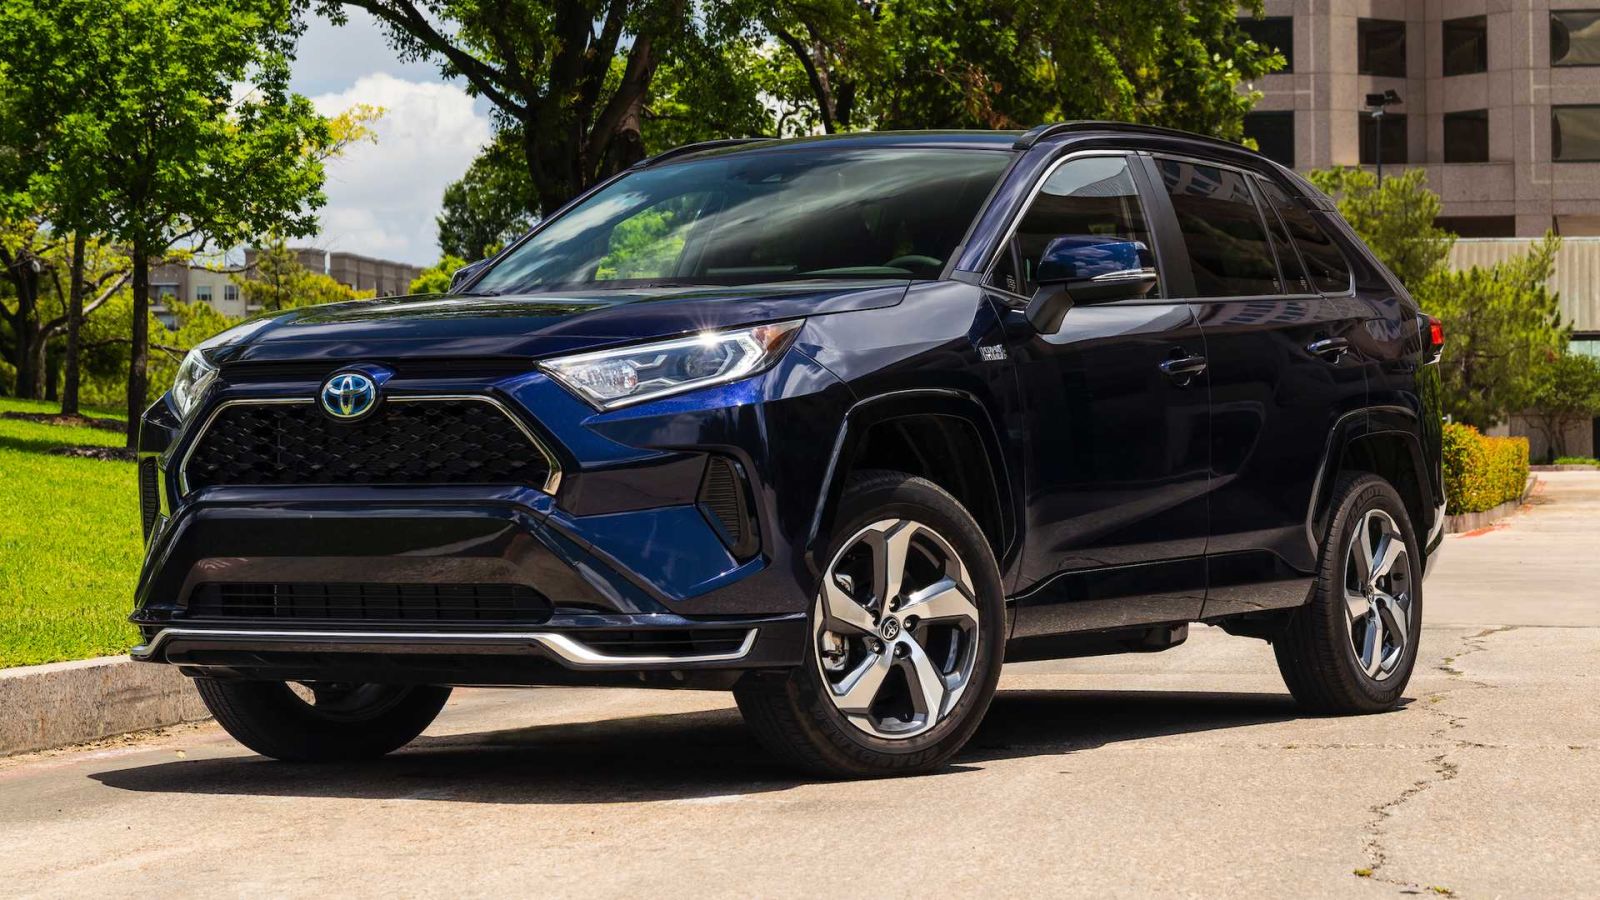 Illustration for article titled Apprently the RAV4 Prime is seeing Dealer Markups As Much As $10K